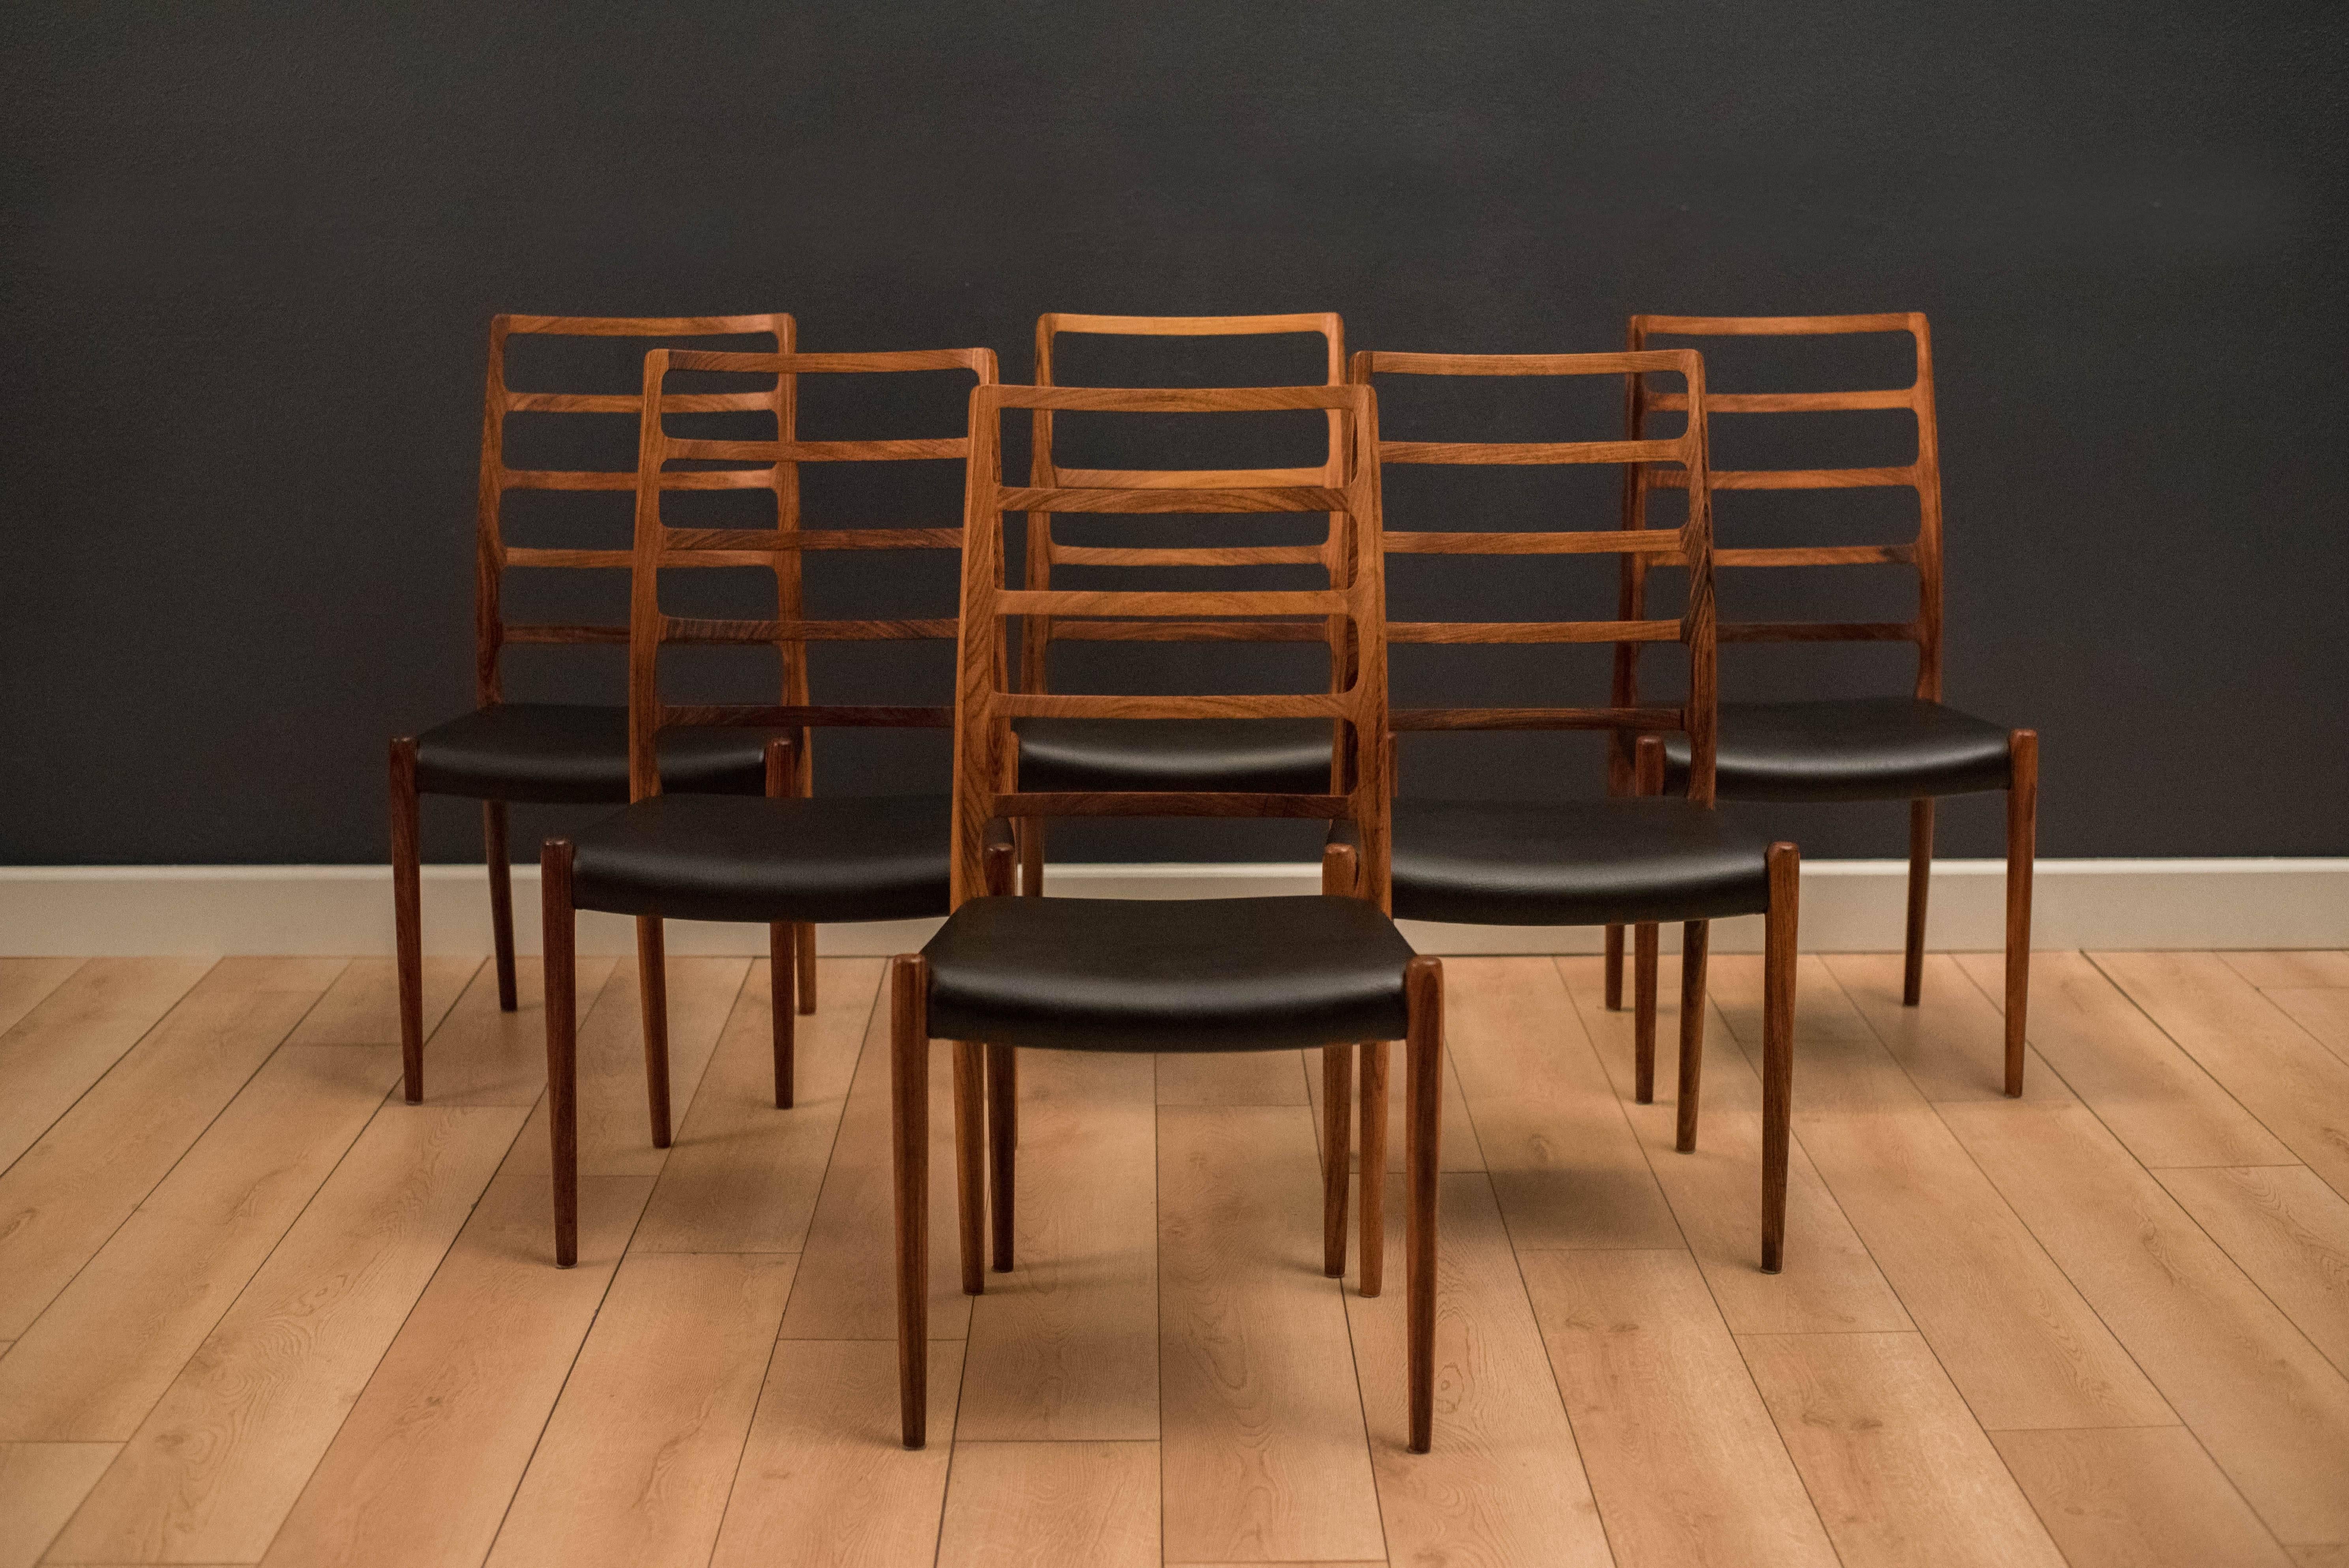 Danish Niels Otto Møller dining chairs model no. 82 in rosewood. This set of six displays stunning rosewood grains and original leatherette seats. Price is for the set of six chairs.